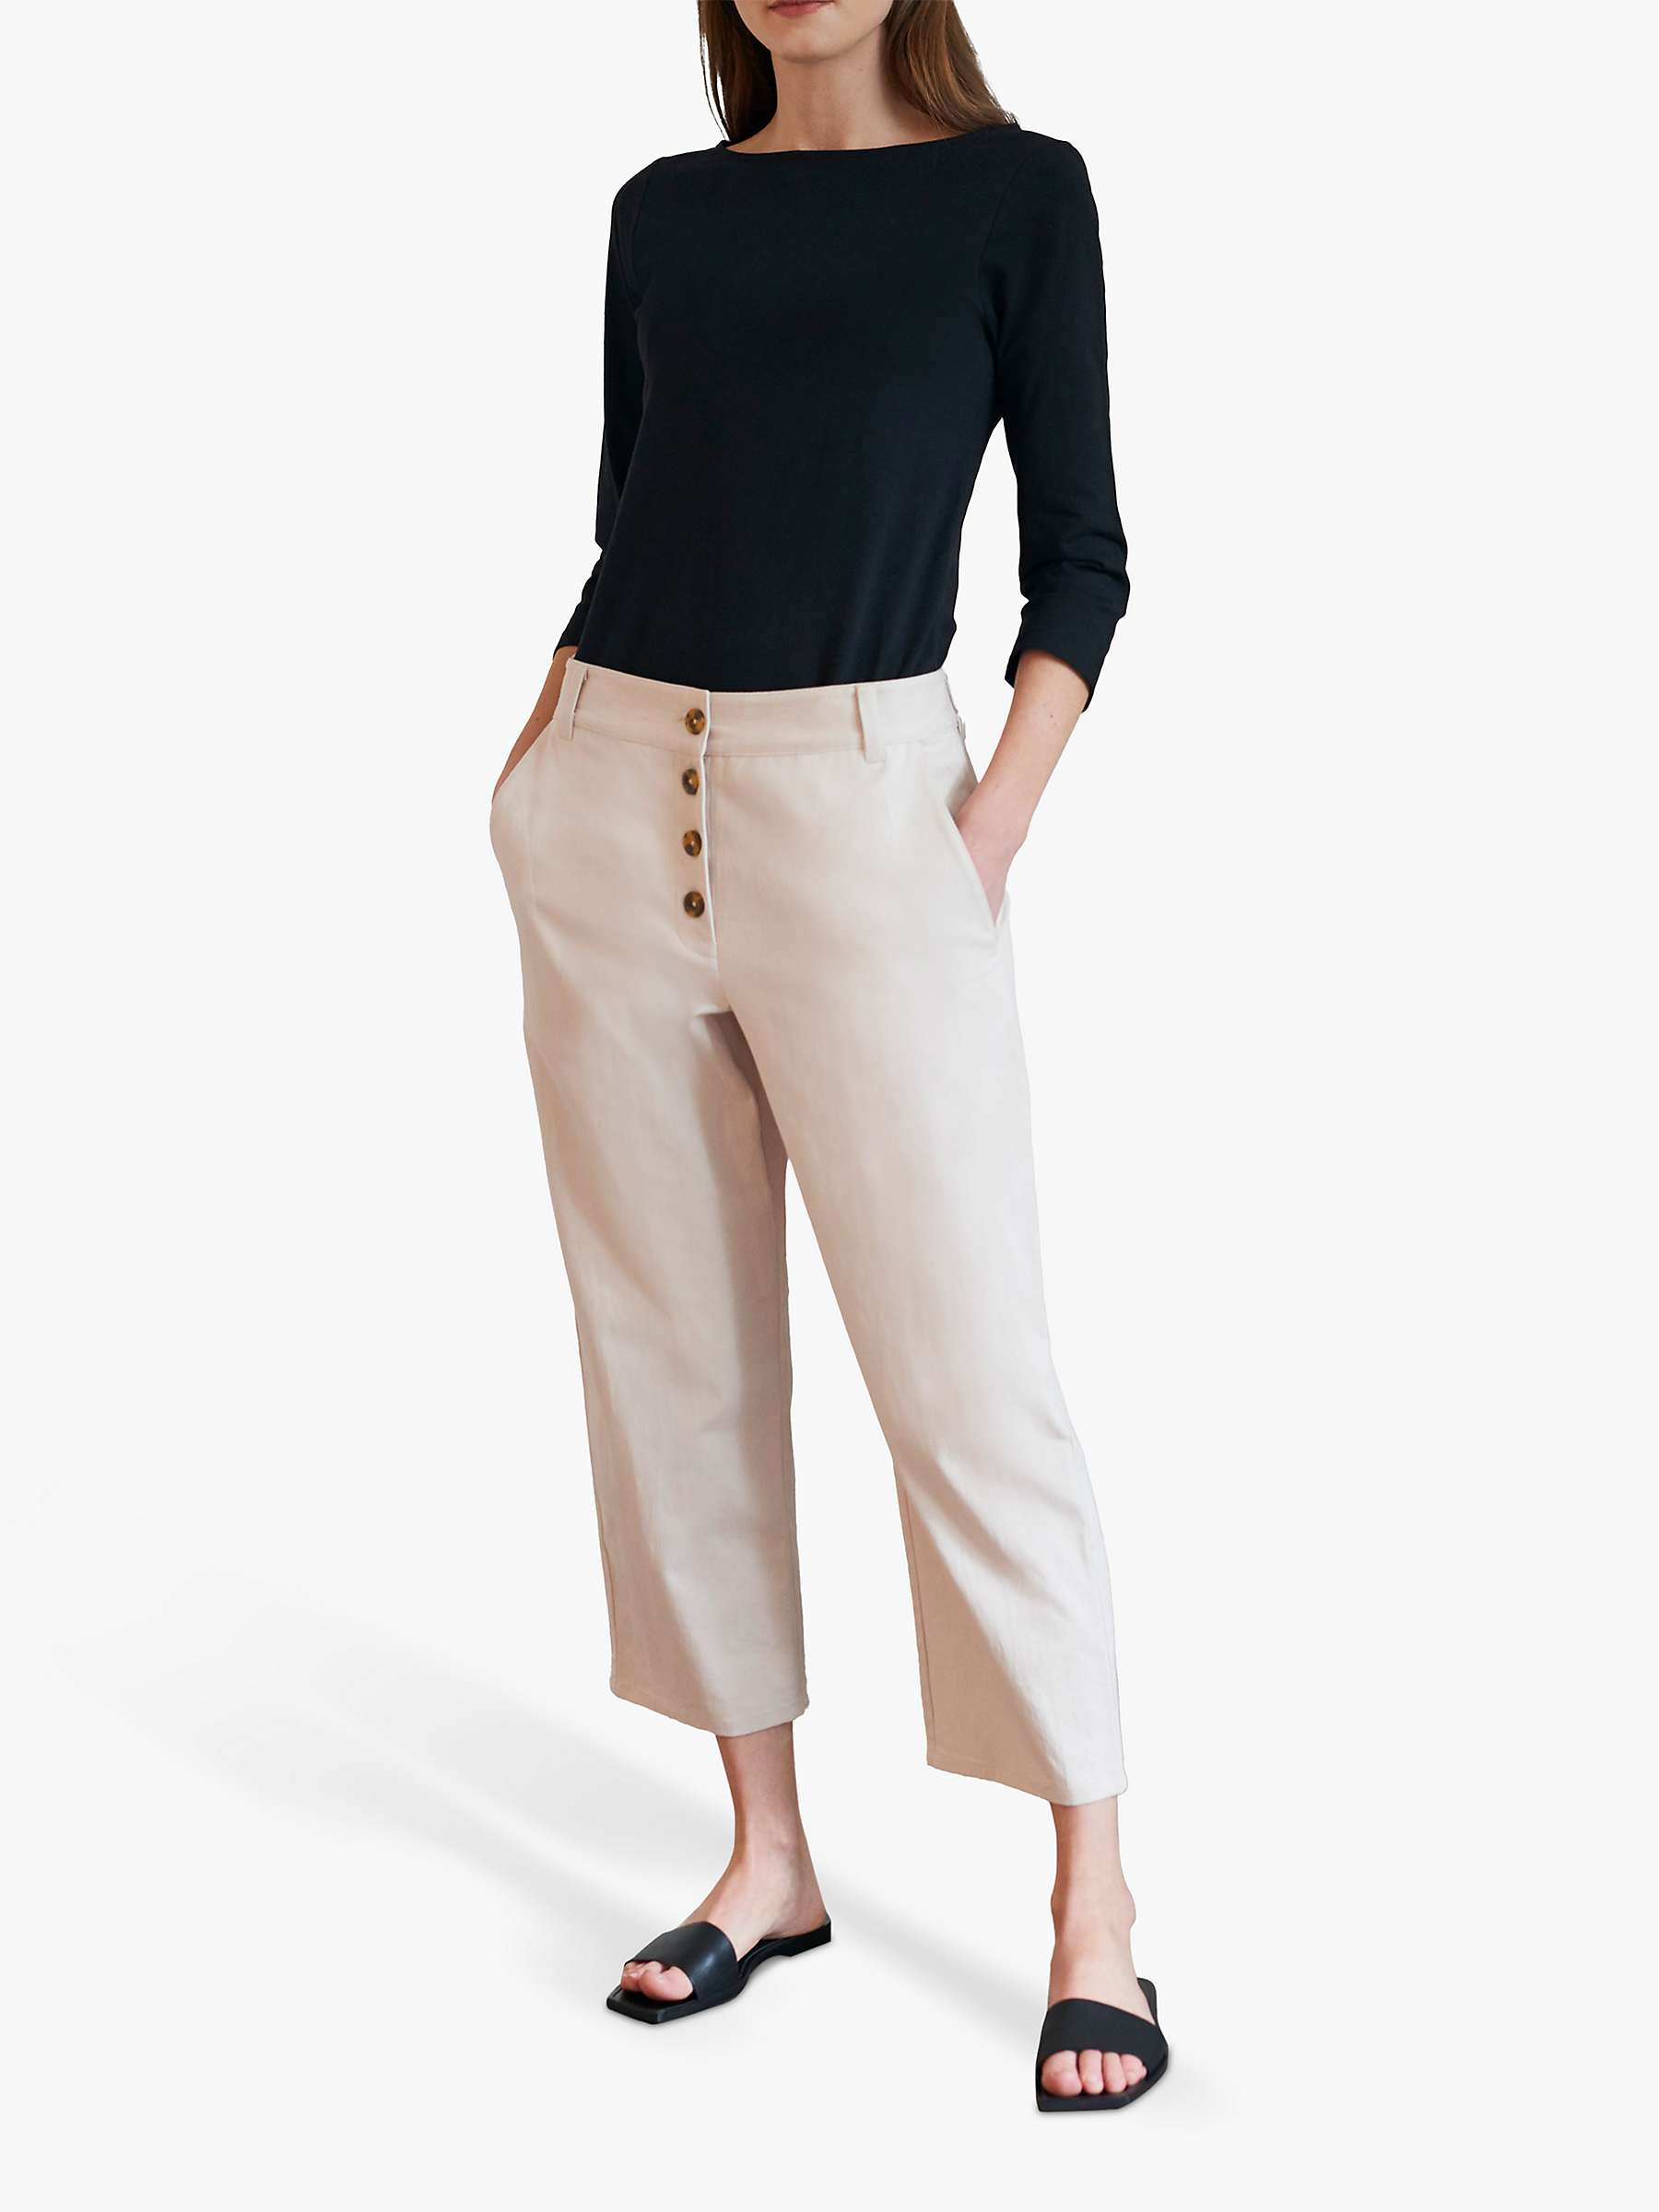 Buy Great Plains Organic Cotton 3/4 Sleeve Top Online at johnlewis.com